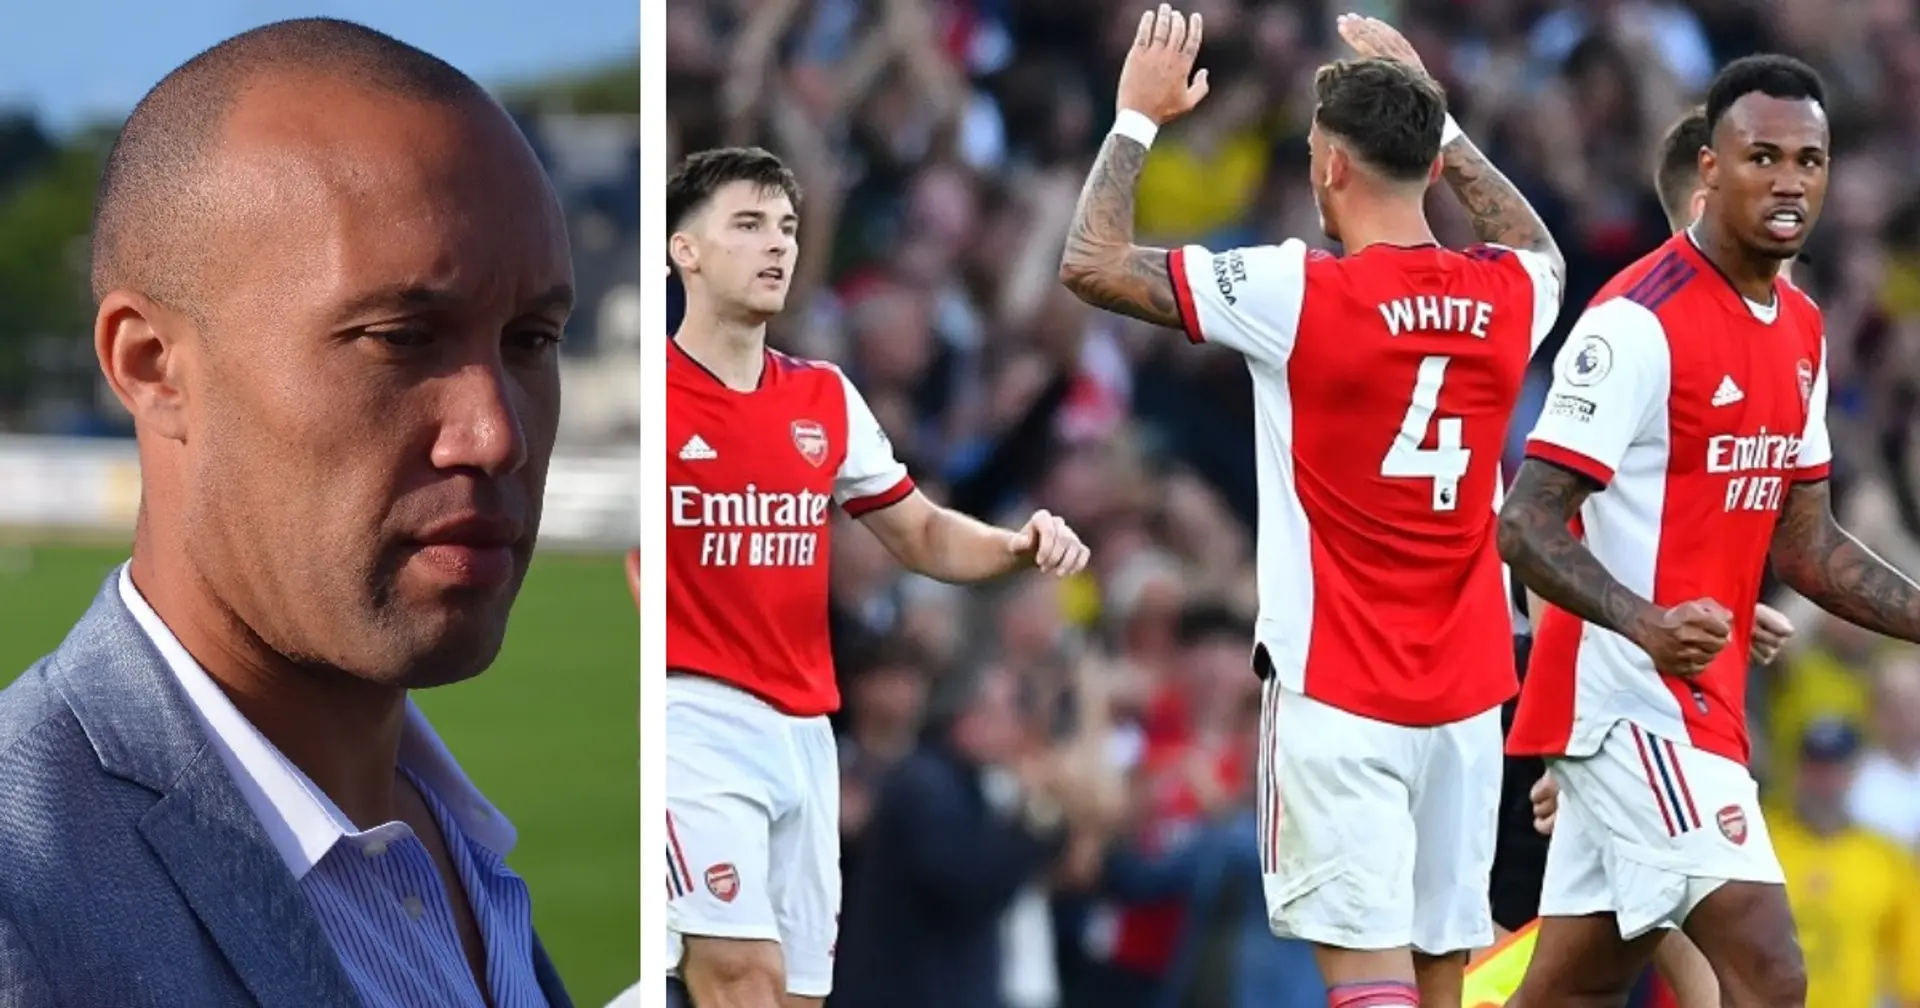 'He goes into challenges with all his heart' - Arsenal defender hailed for his passion  